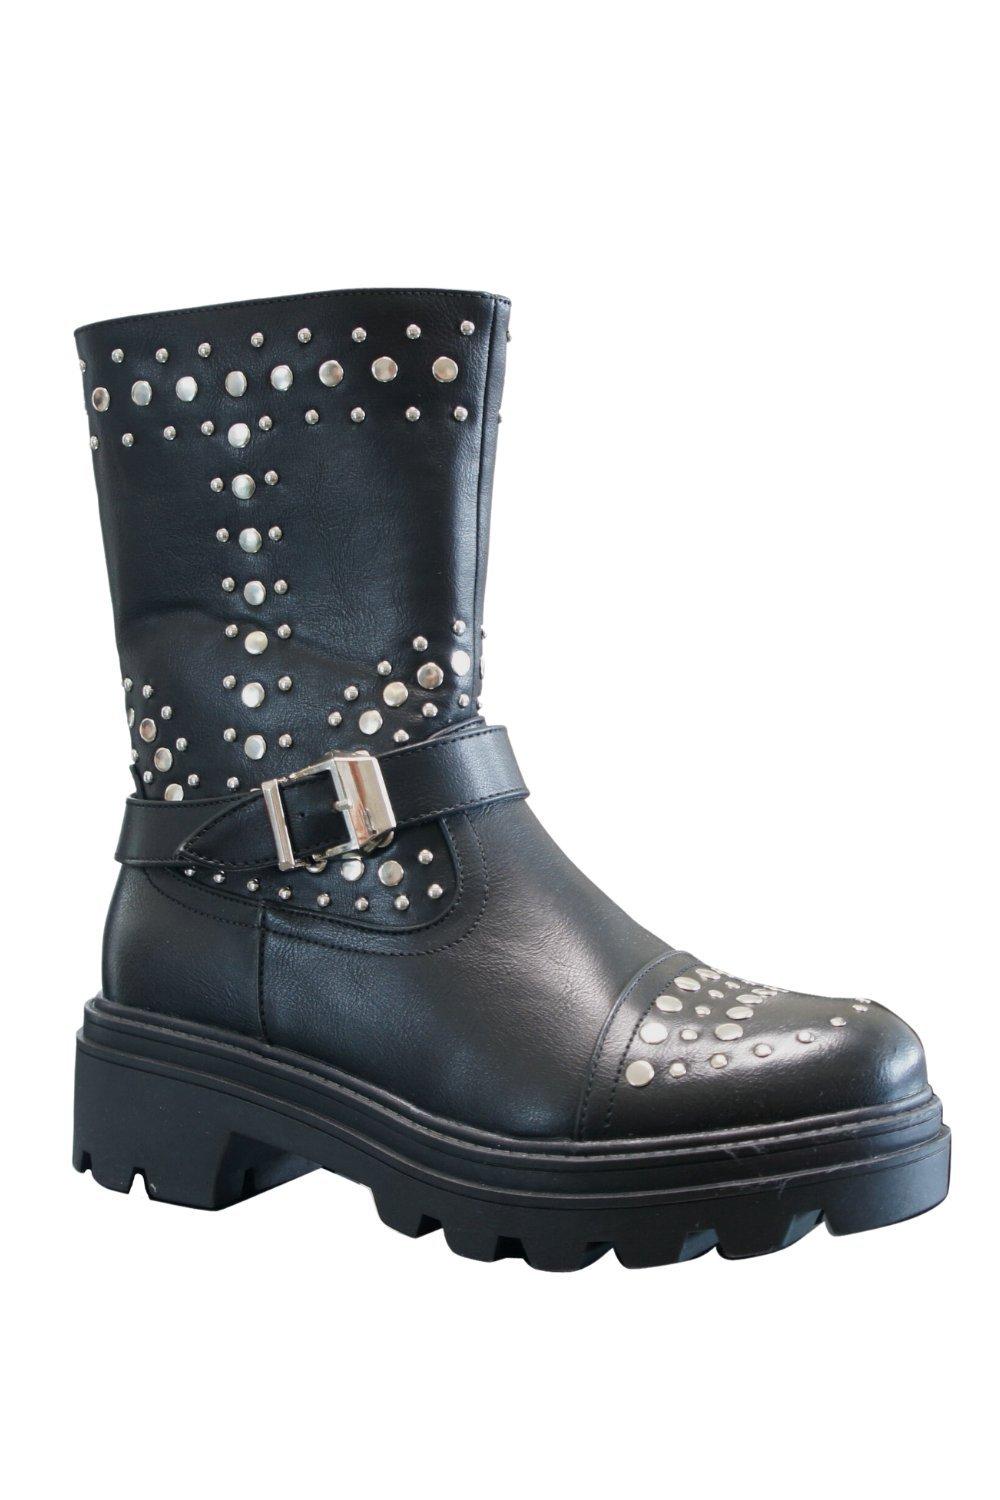 Boots | Black Studded Black buckle Chunky Zip Closure Ankle Boots | IVACHY